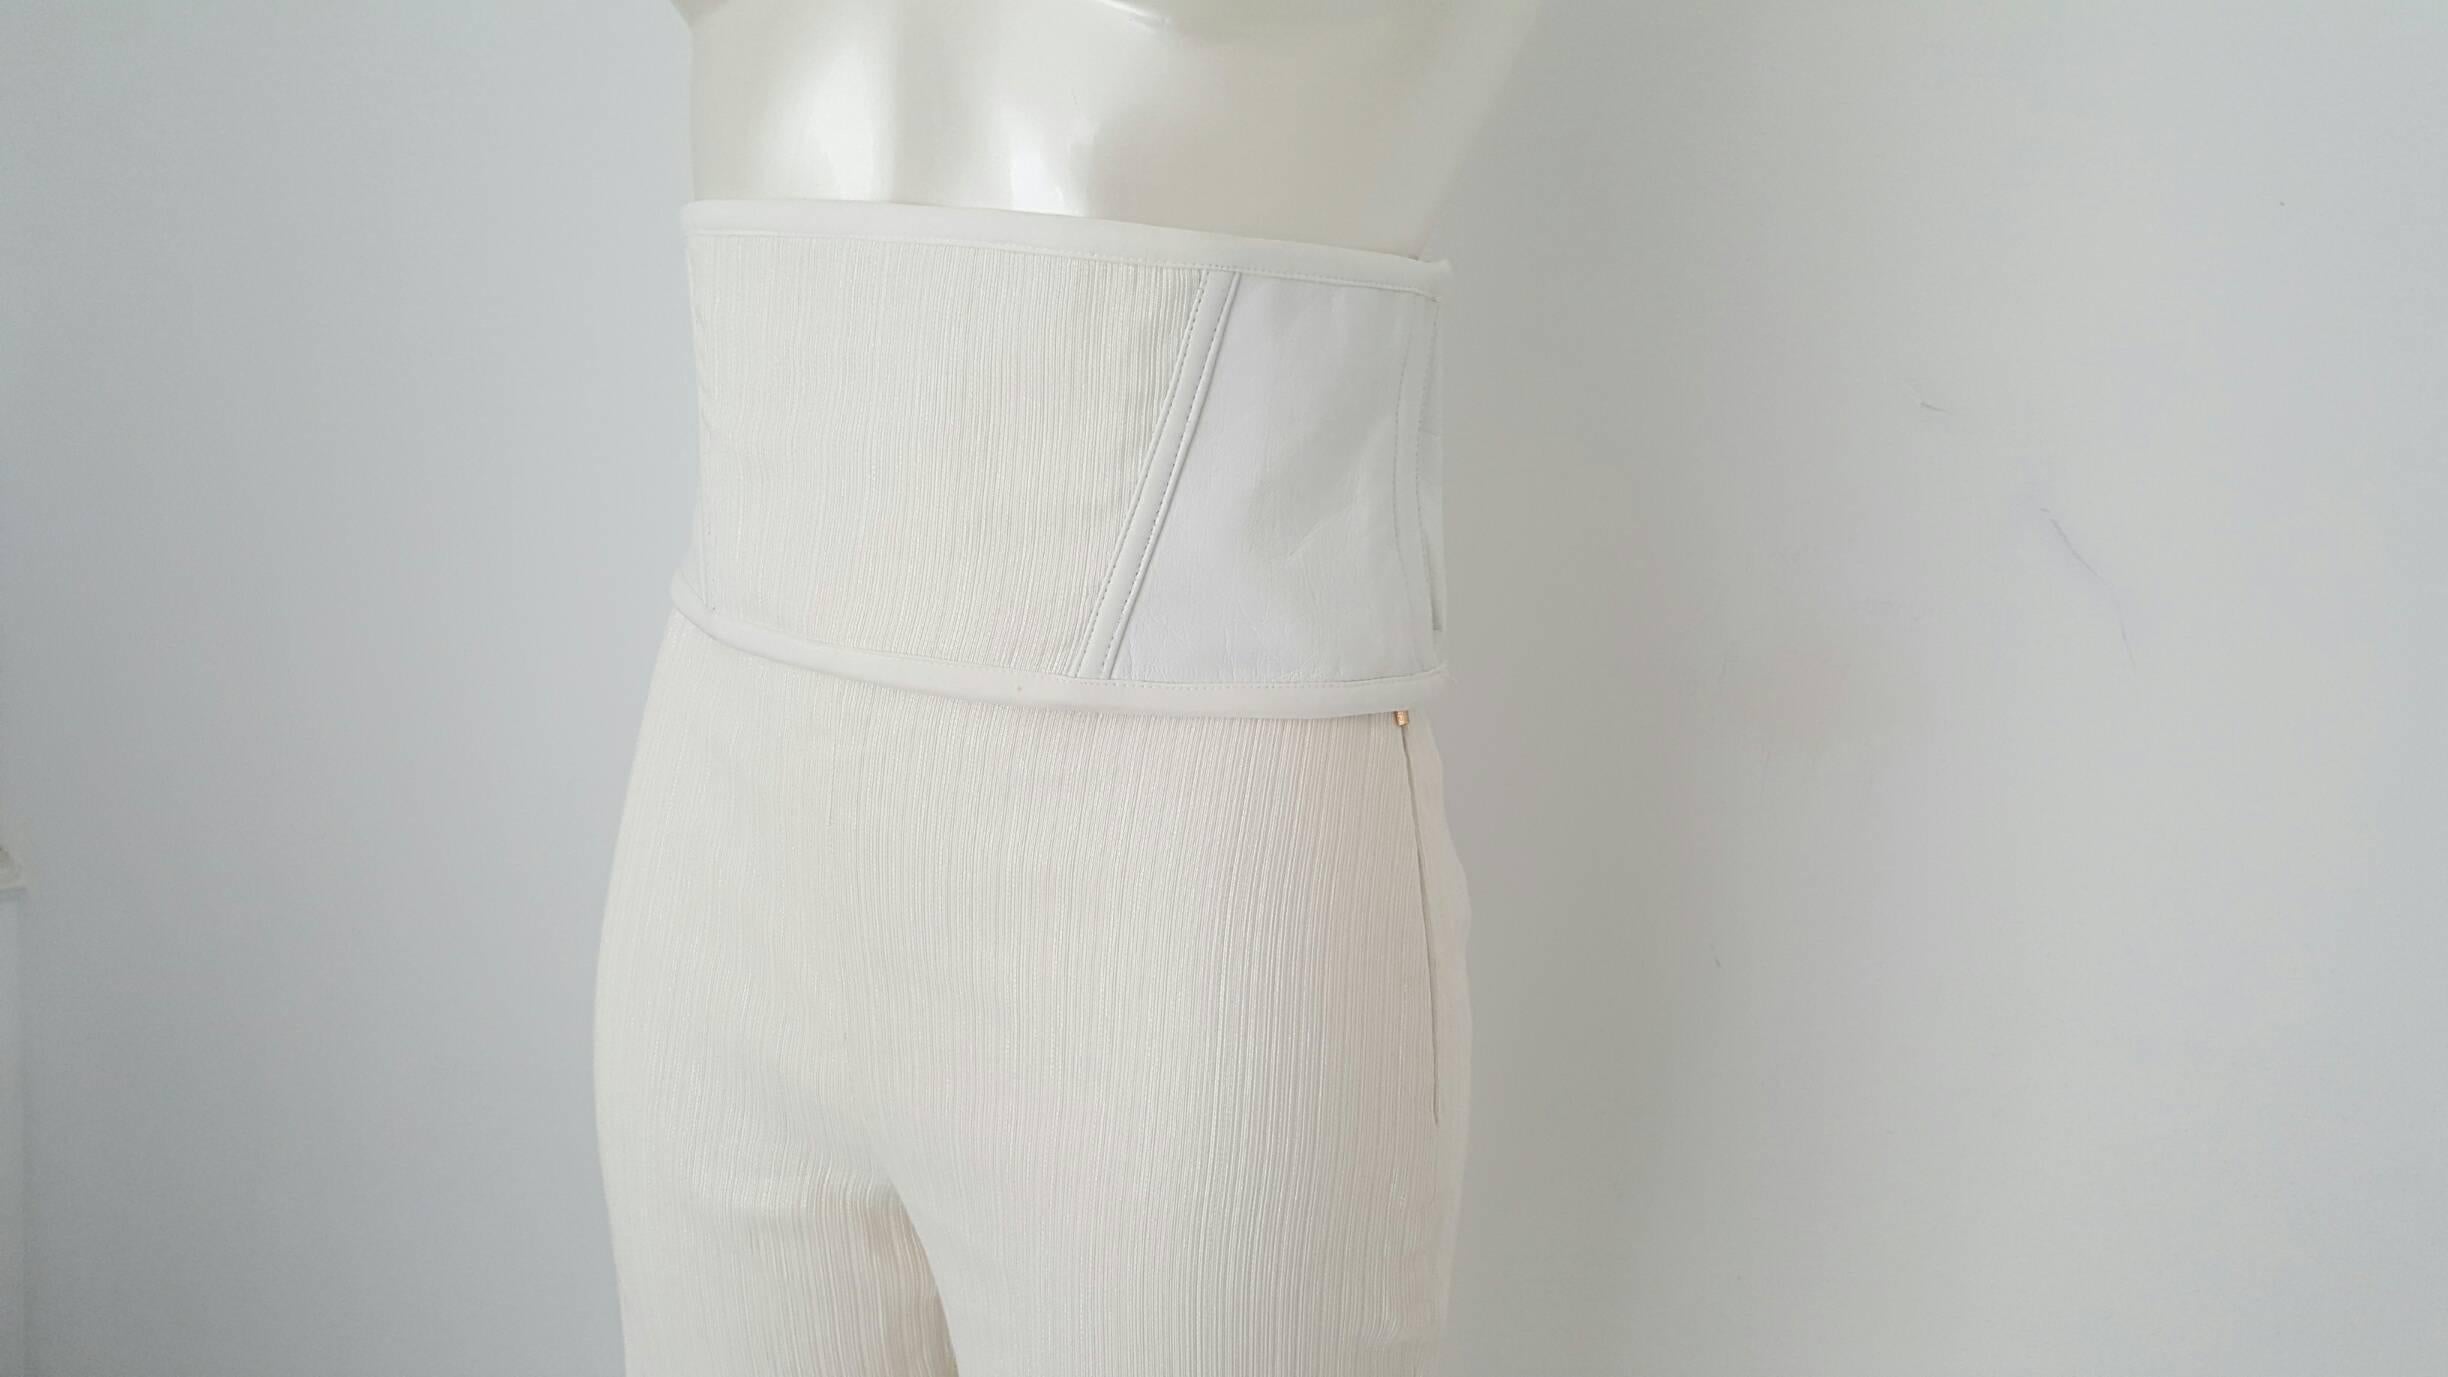 1990s Gianni Versace white trousers with belt still with original tags 
in italian size range 40
composition is 76 viscose 24 silk
